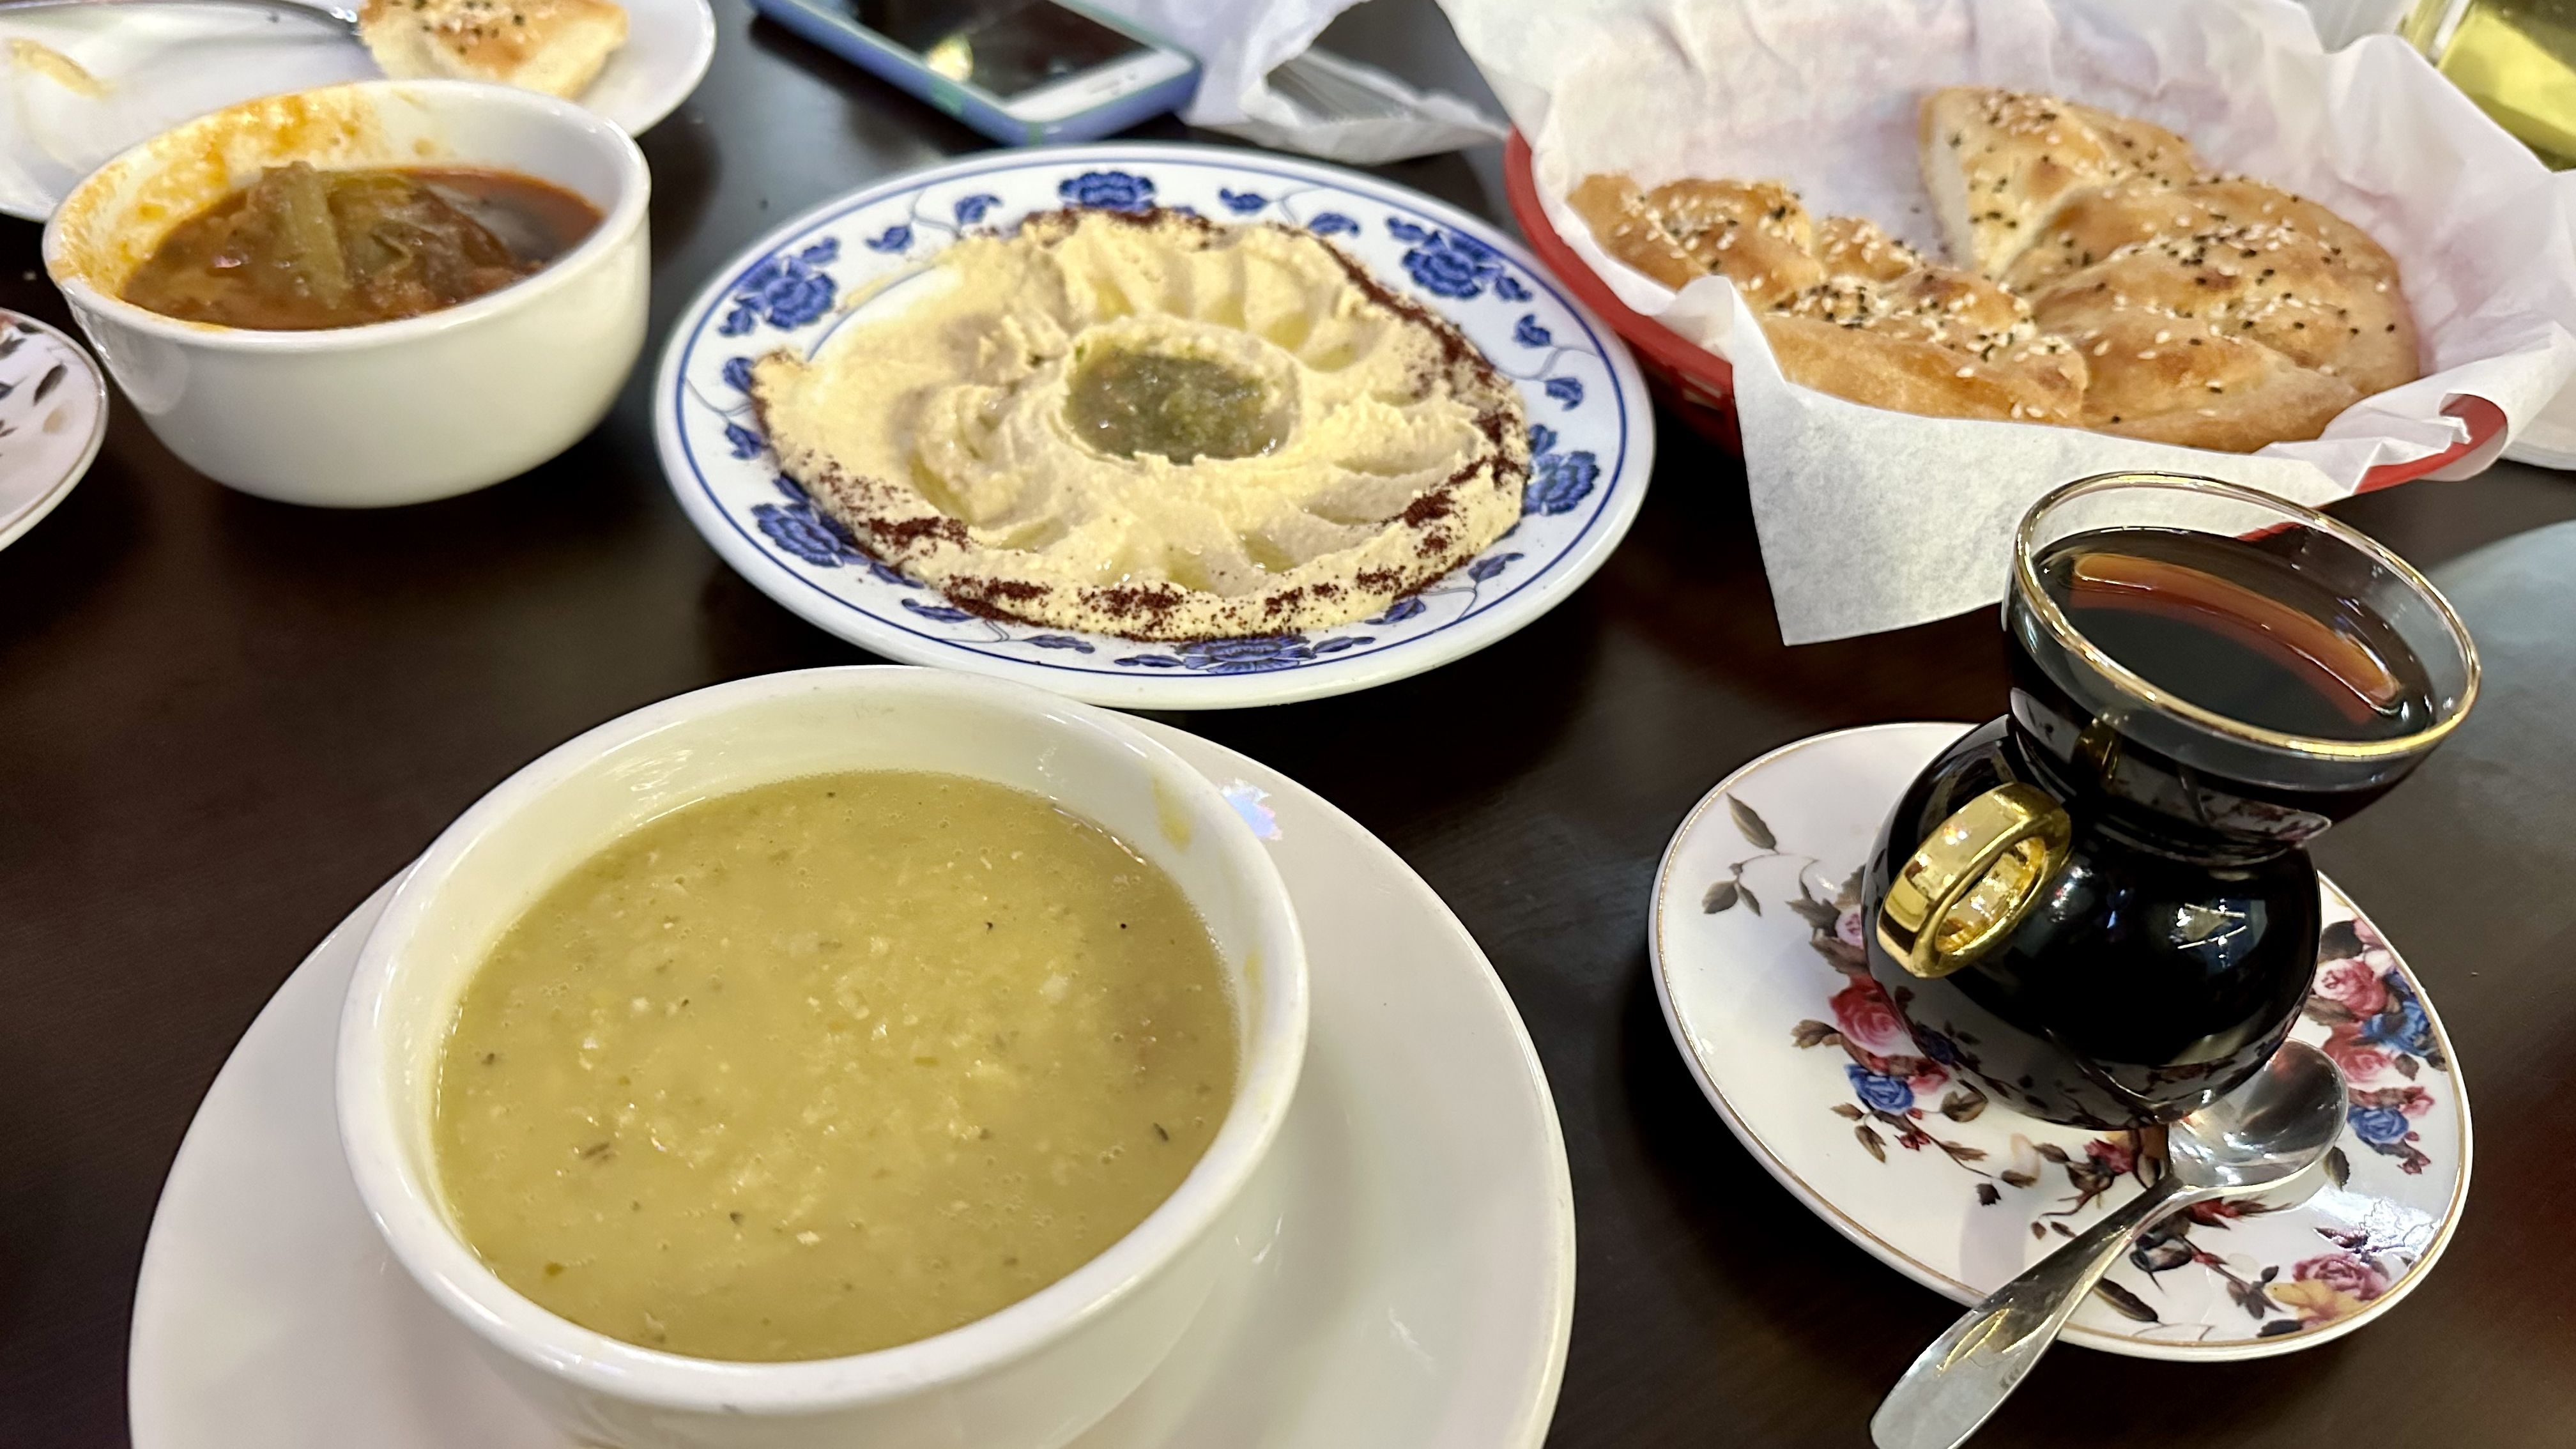 Photo shows a bowl of lentil soup with hummus, bread, Iraqi black tea and eggplant soup.